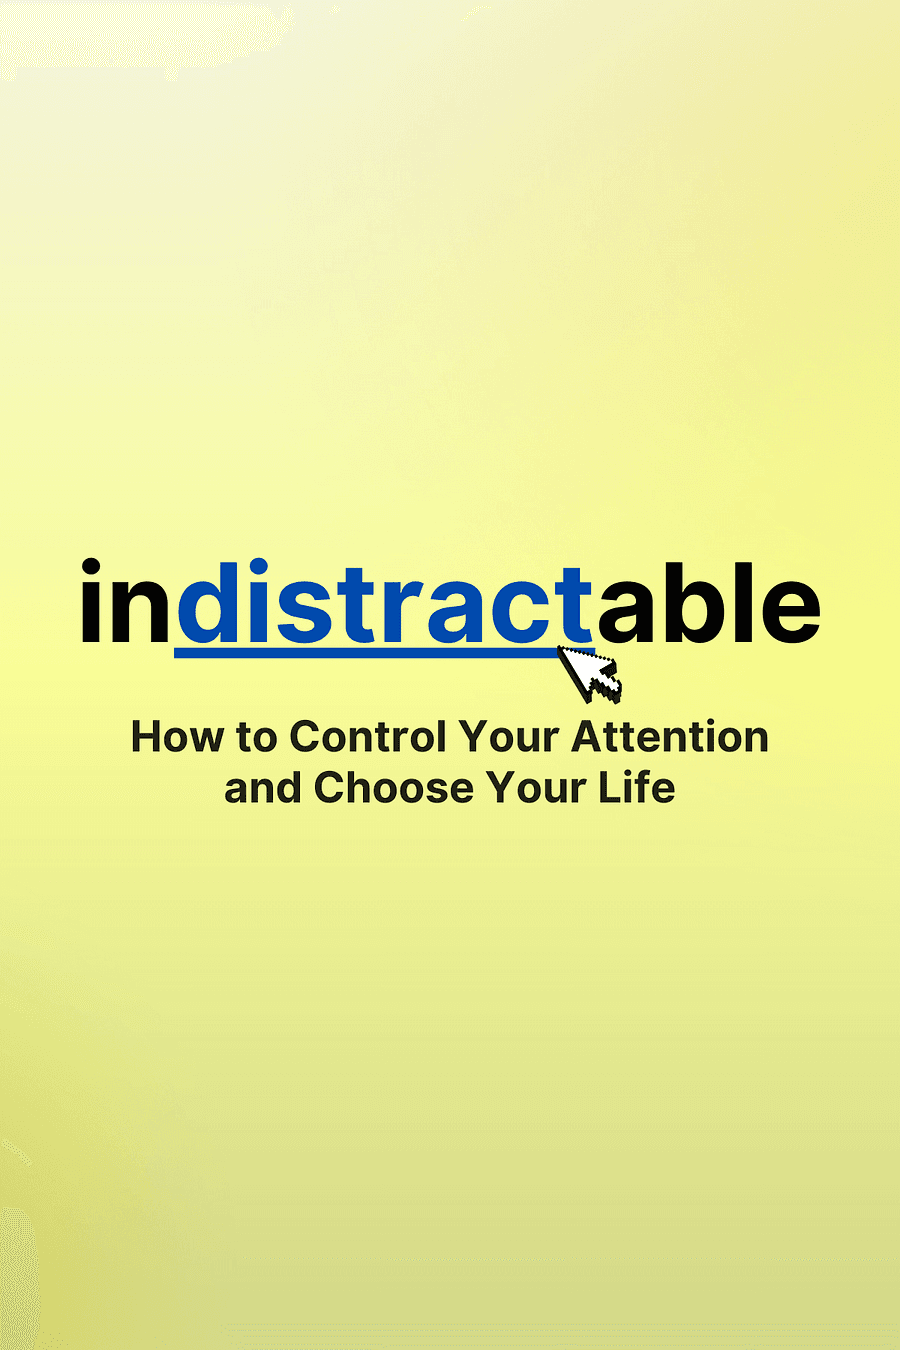 Indistractable by Nir Eyal - Book Summary